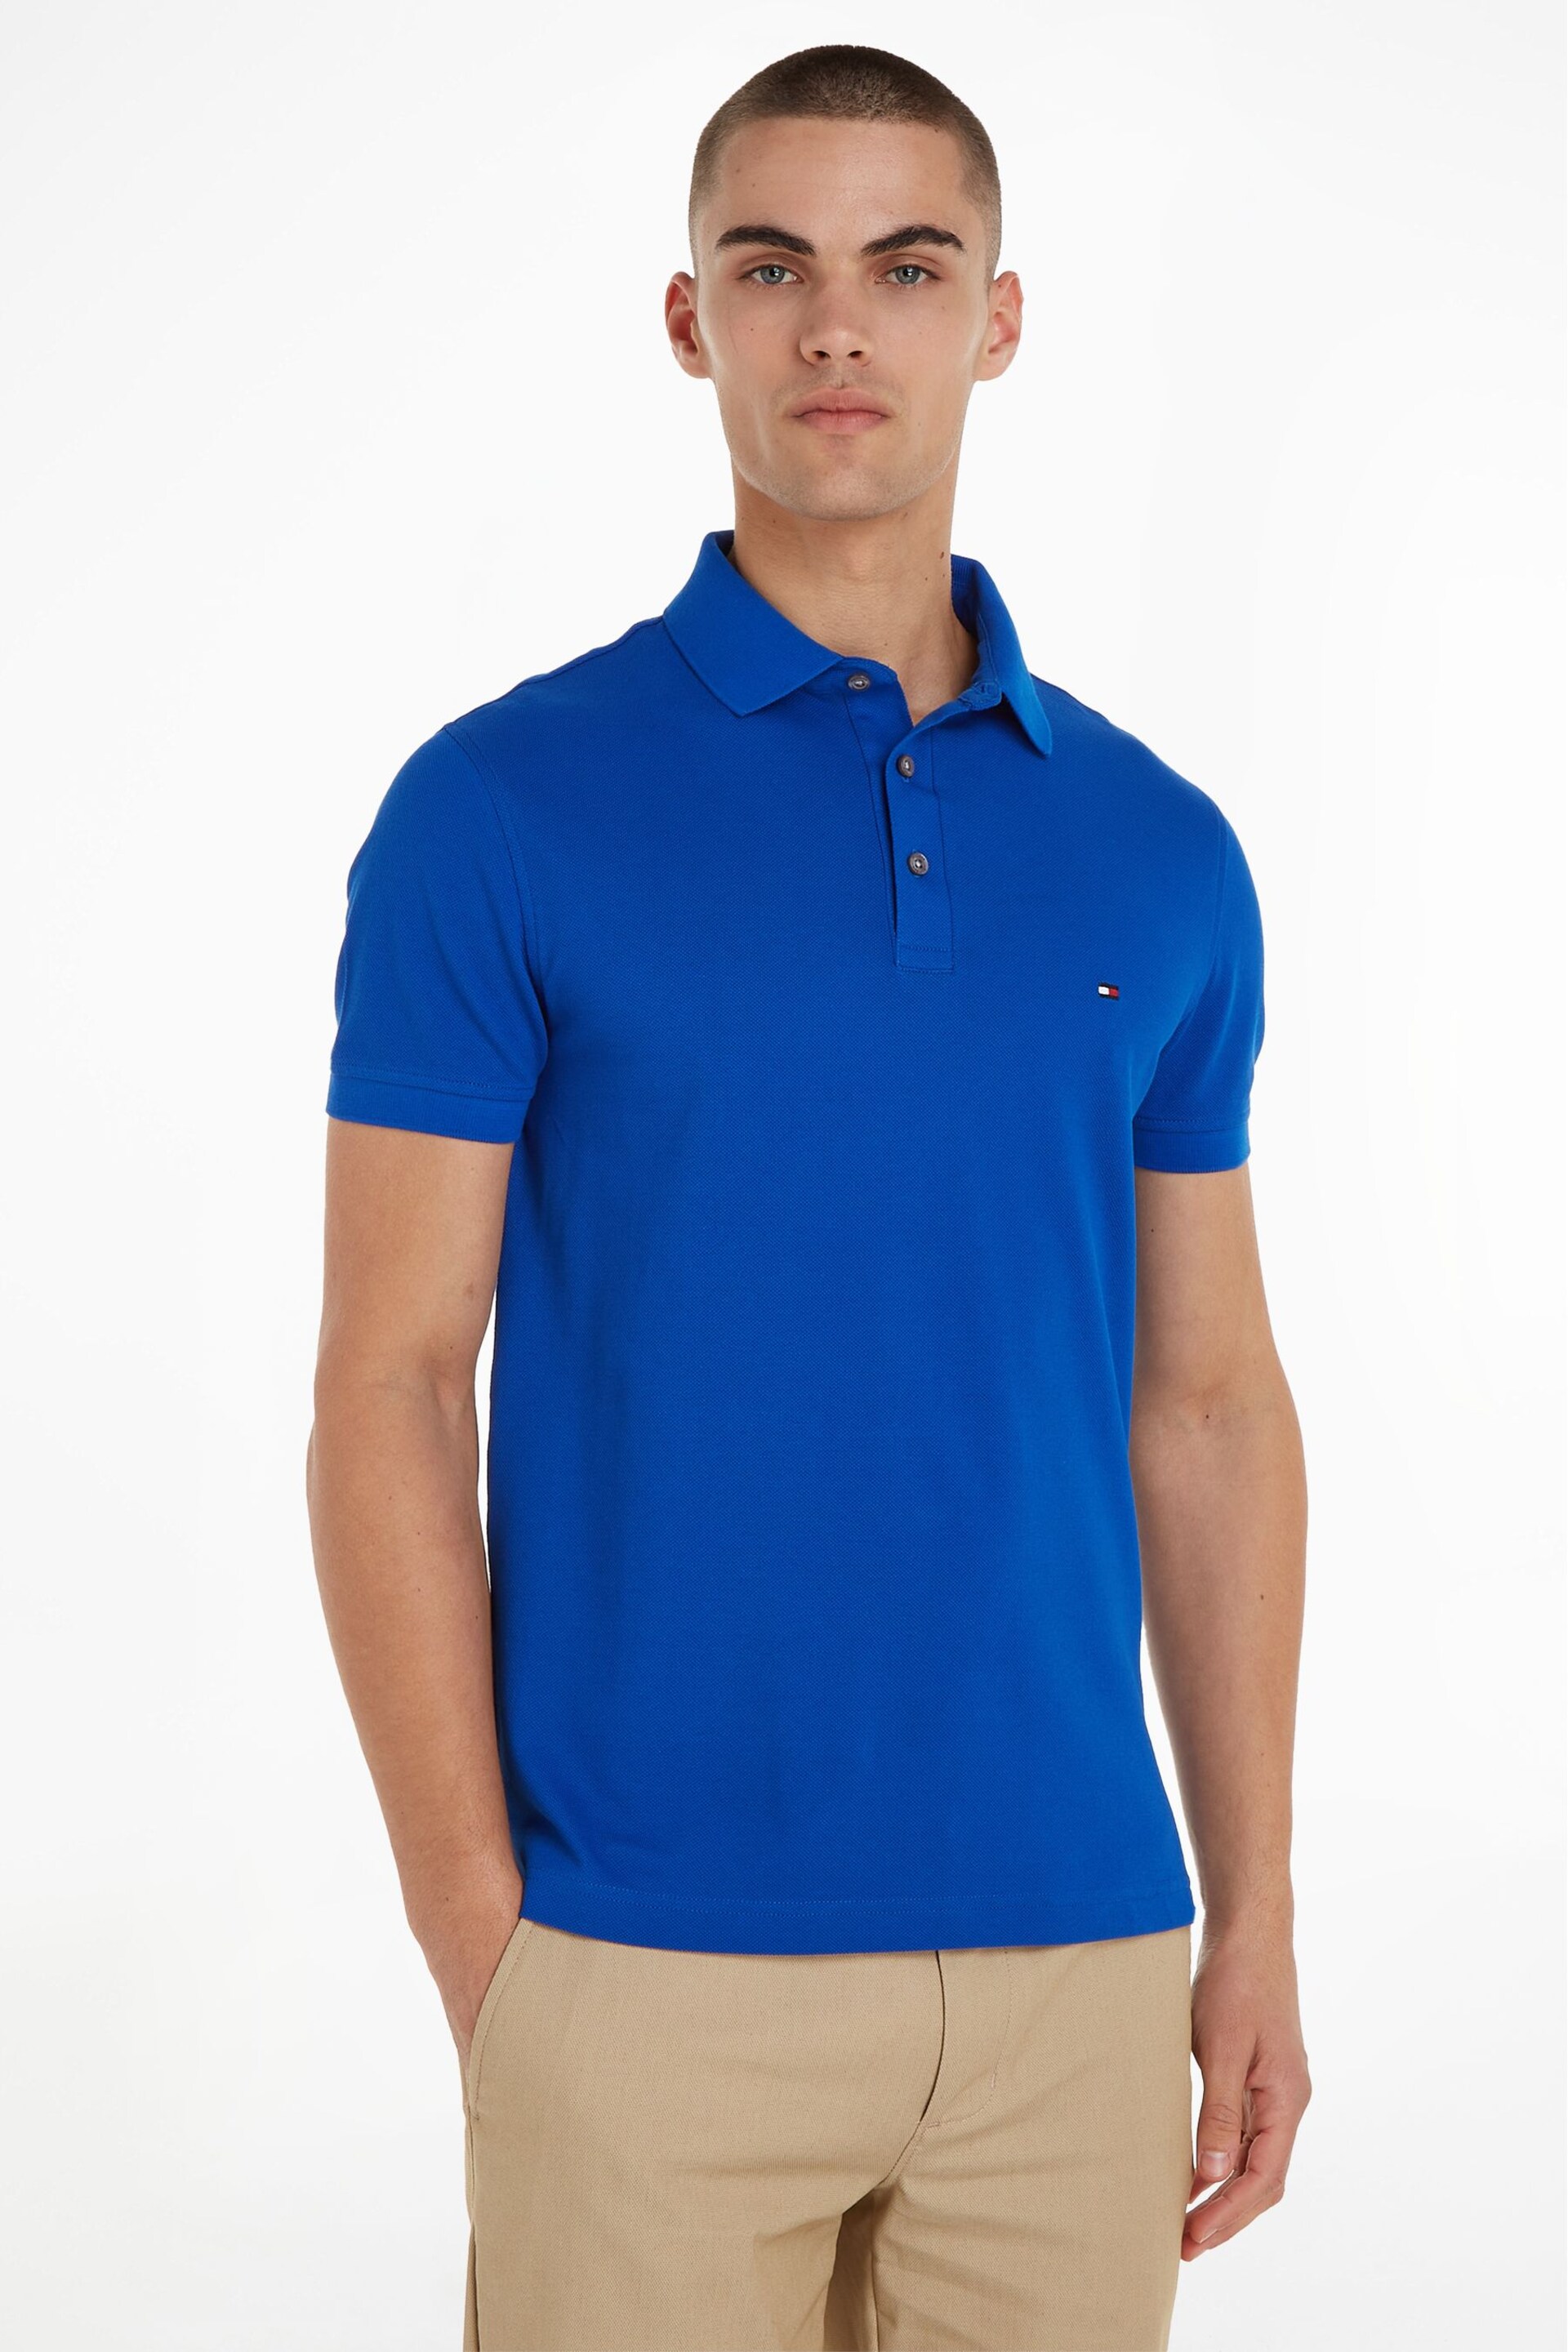 Tommy Hilfiger Slim Fit Blue Polo Shirt - Image 1 of 6